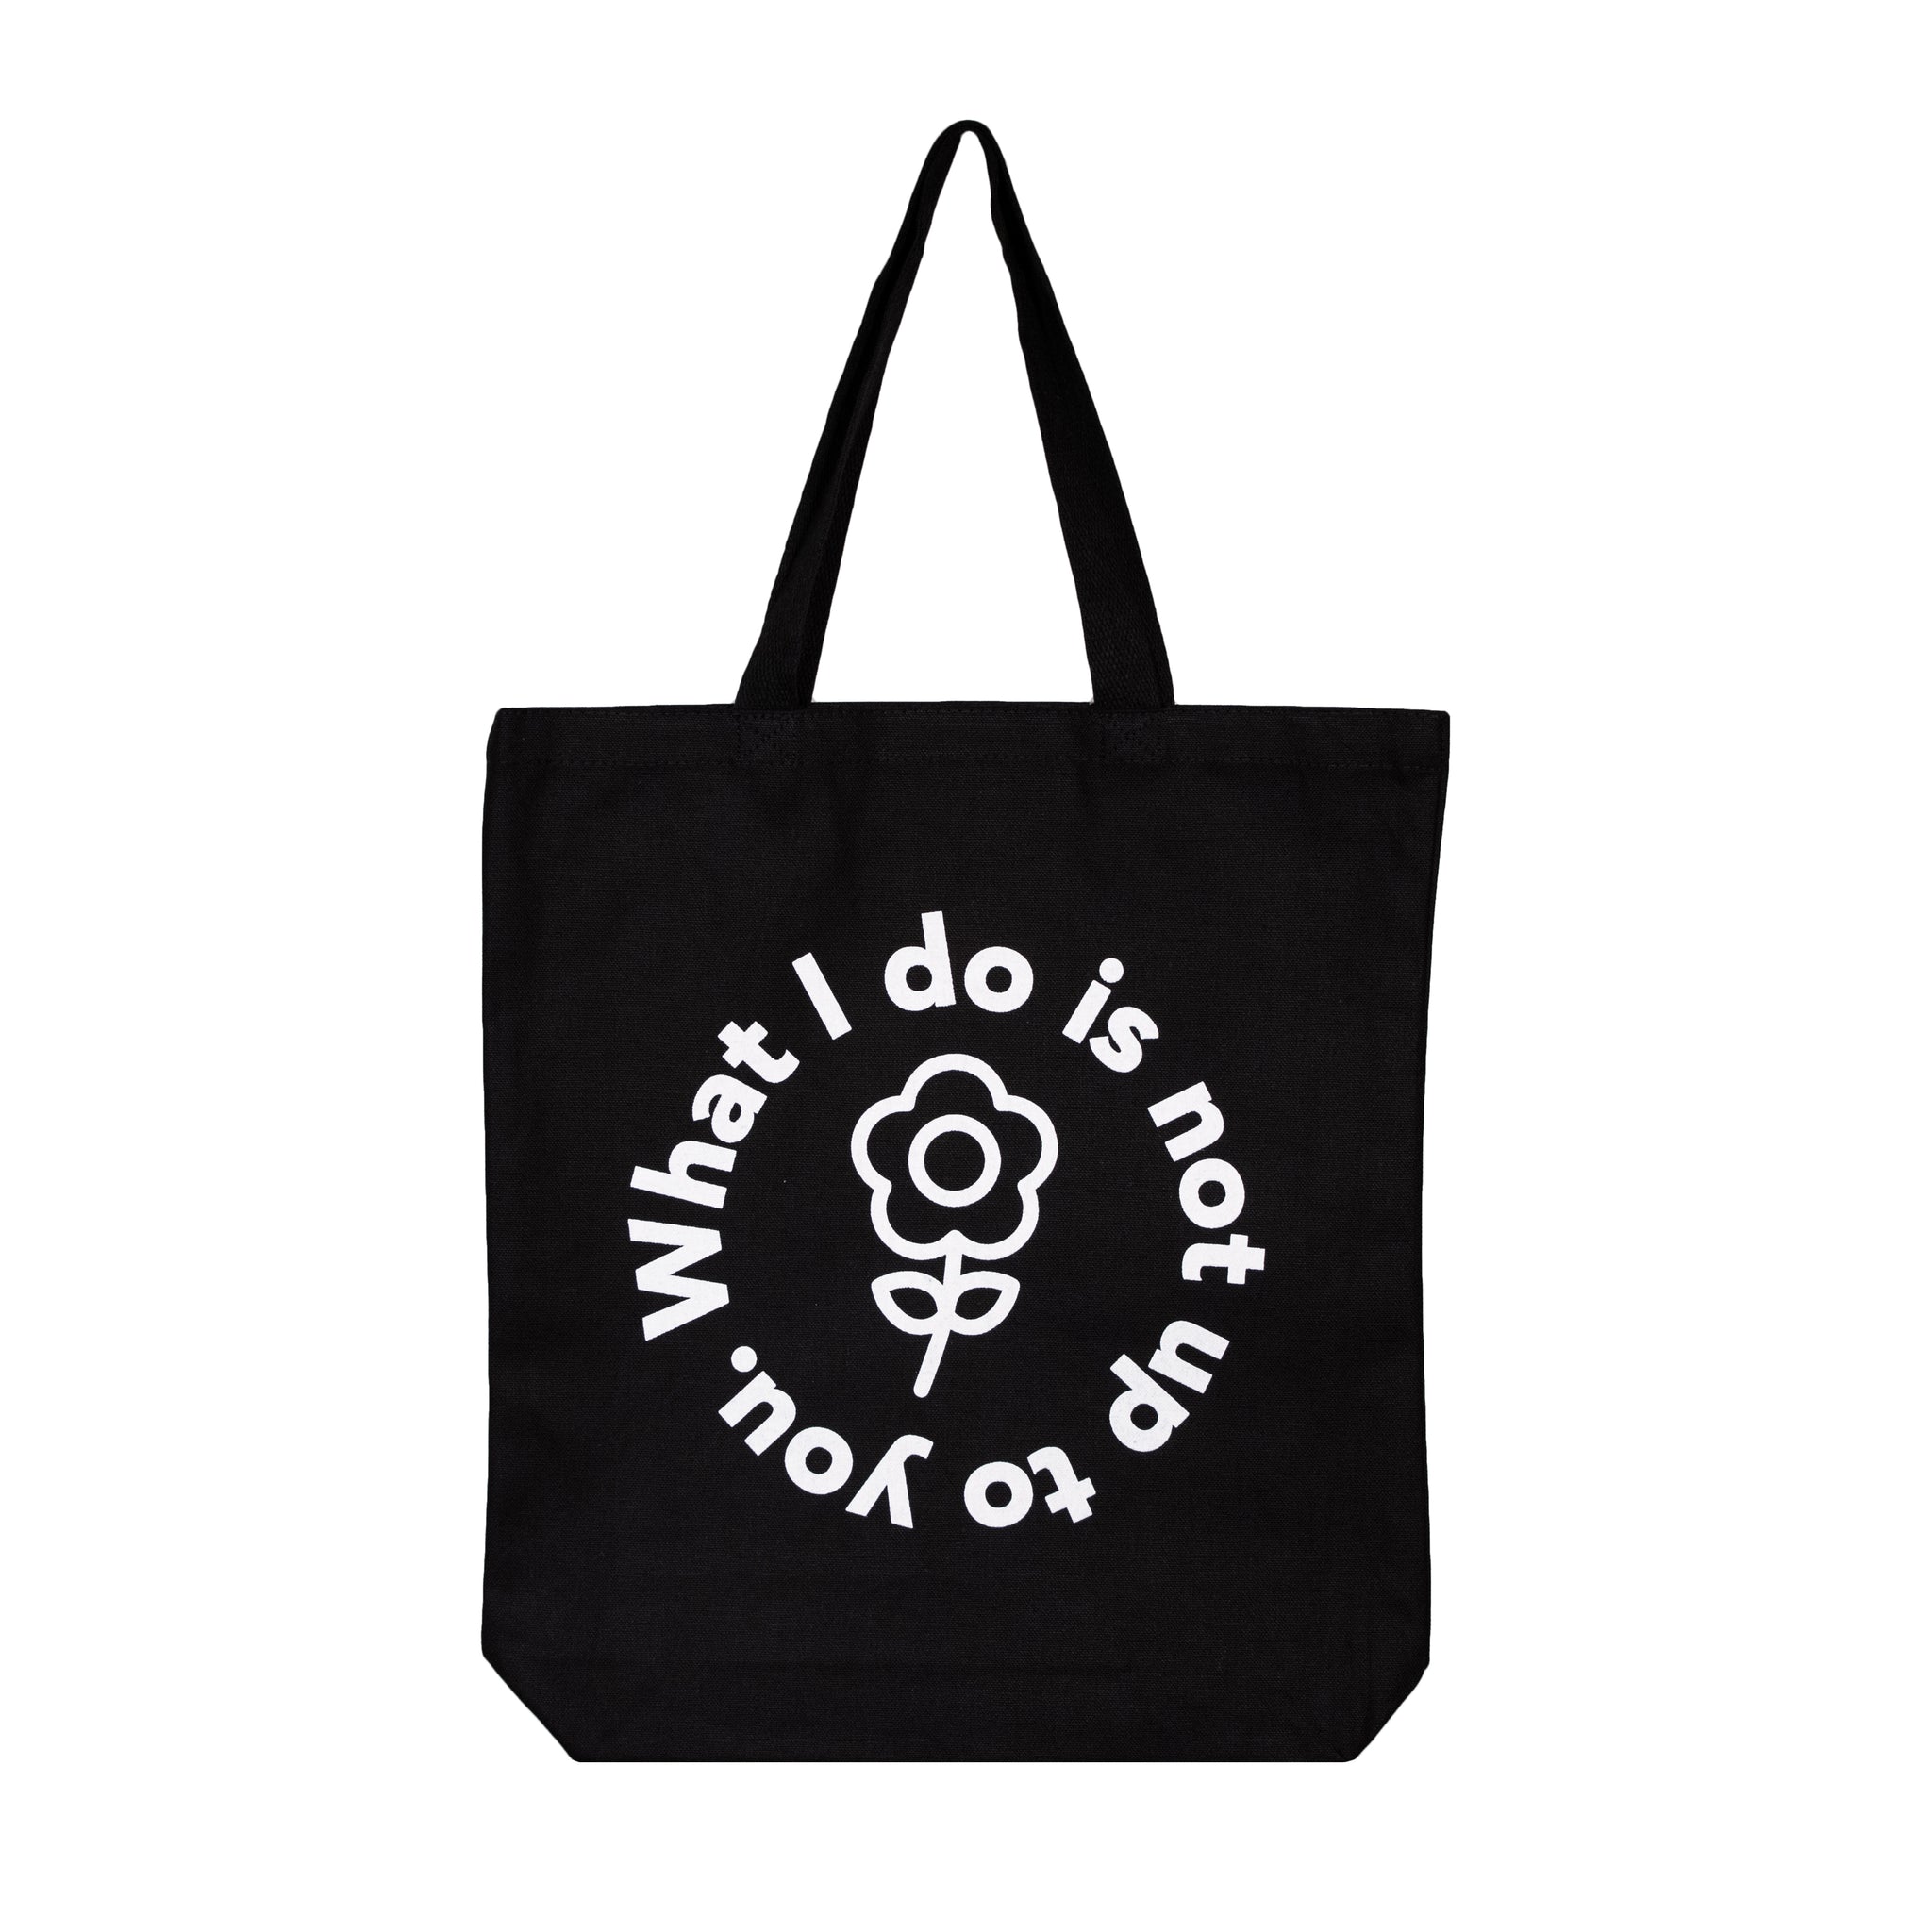 What I Do Is Not Up To You Tote